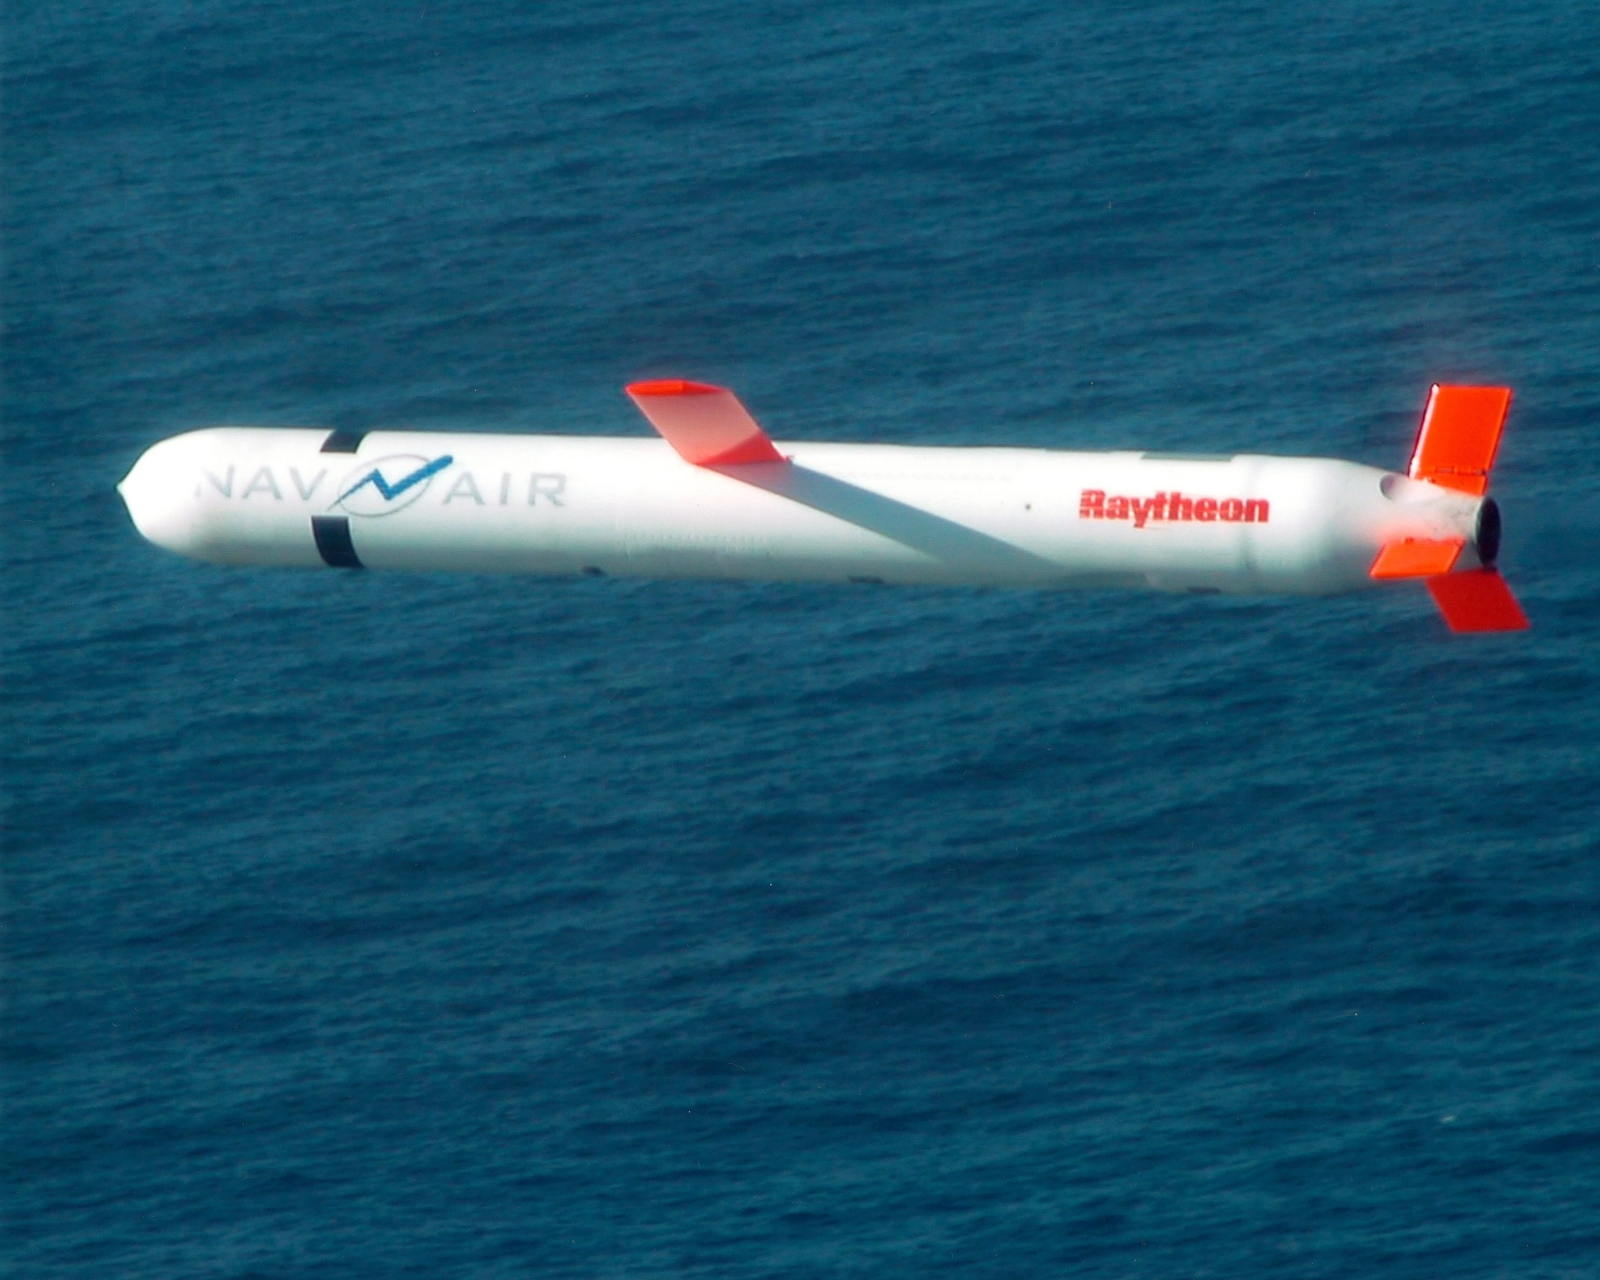 who invented the tomahawk cruise missile